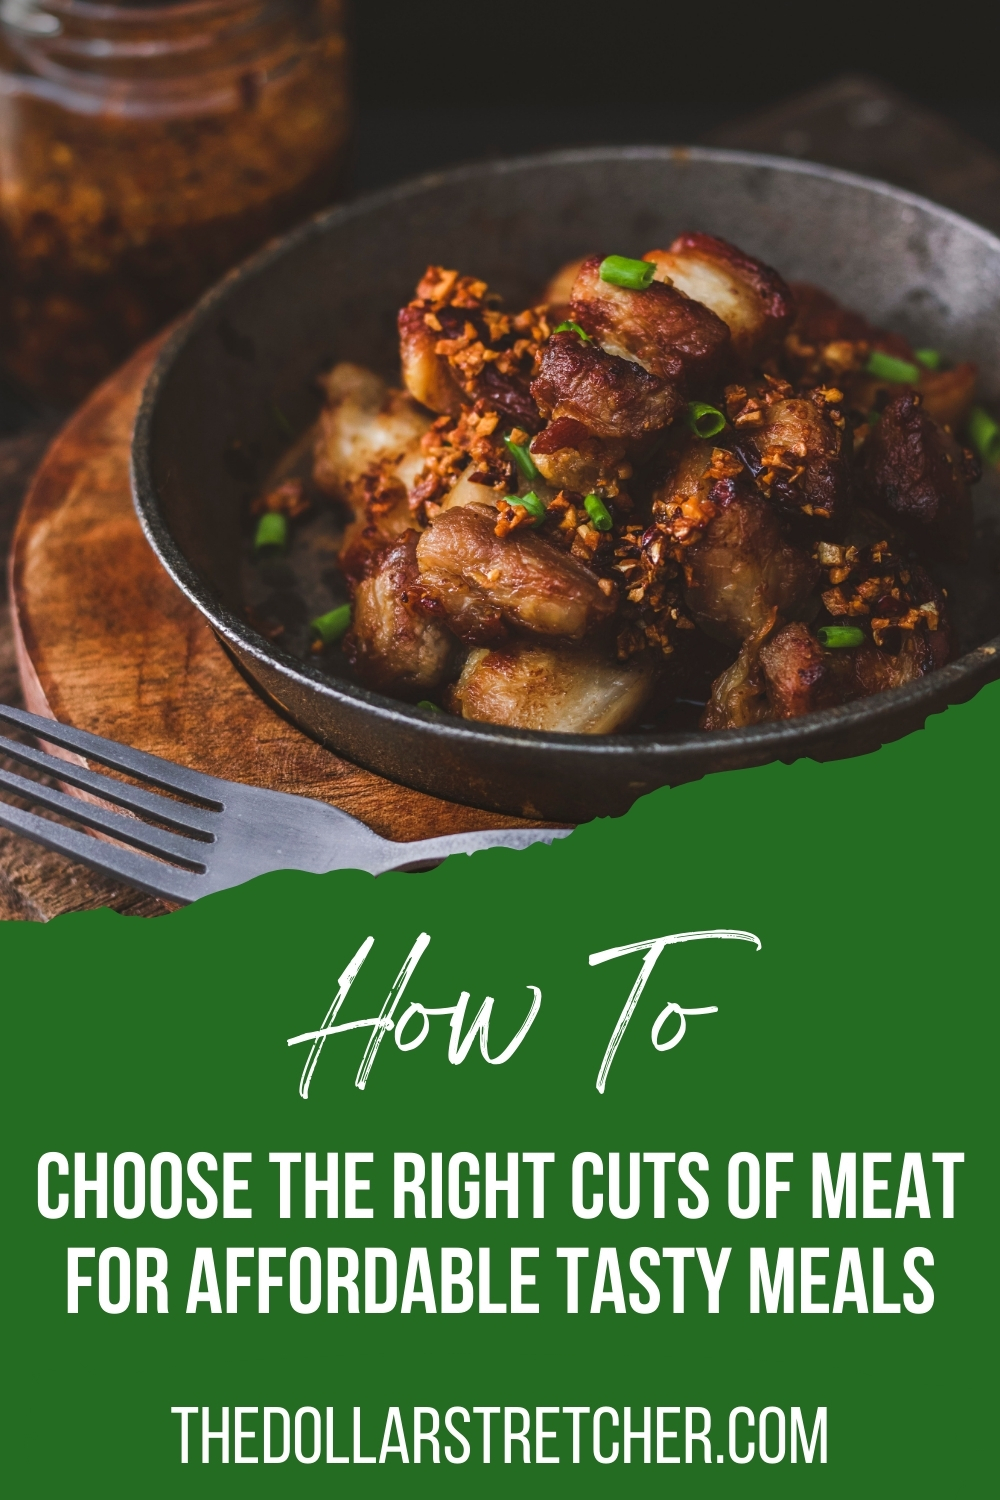 How To Choose the Right Cuts of Meat PIN